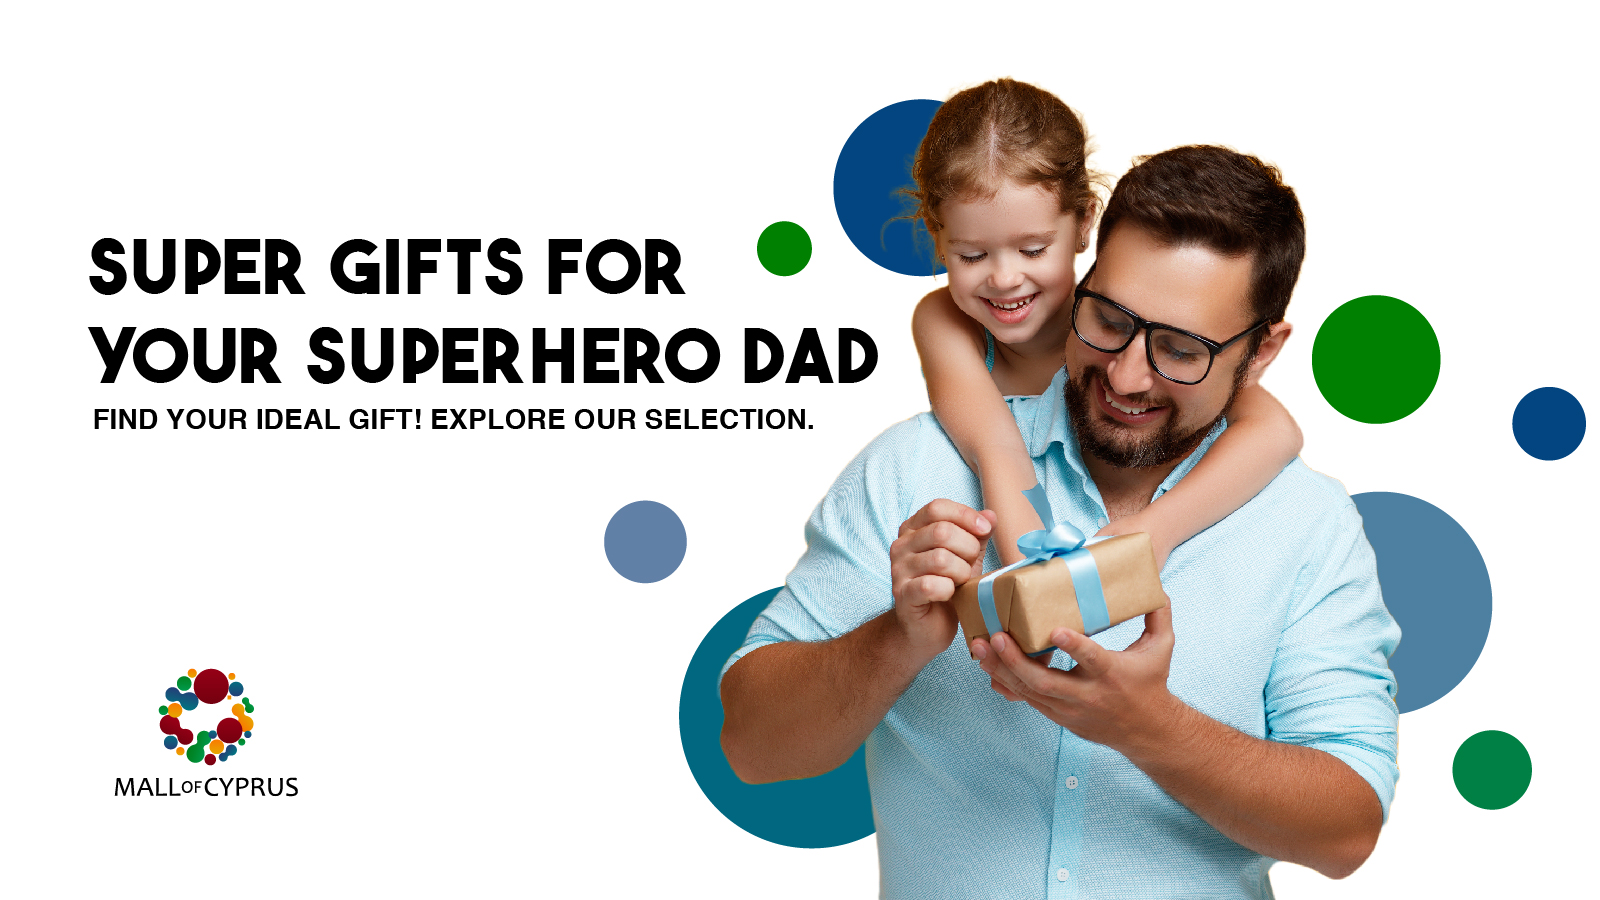 Father’s Day Gift Ideas!